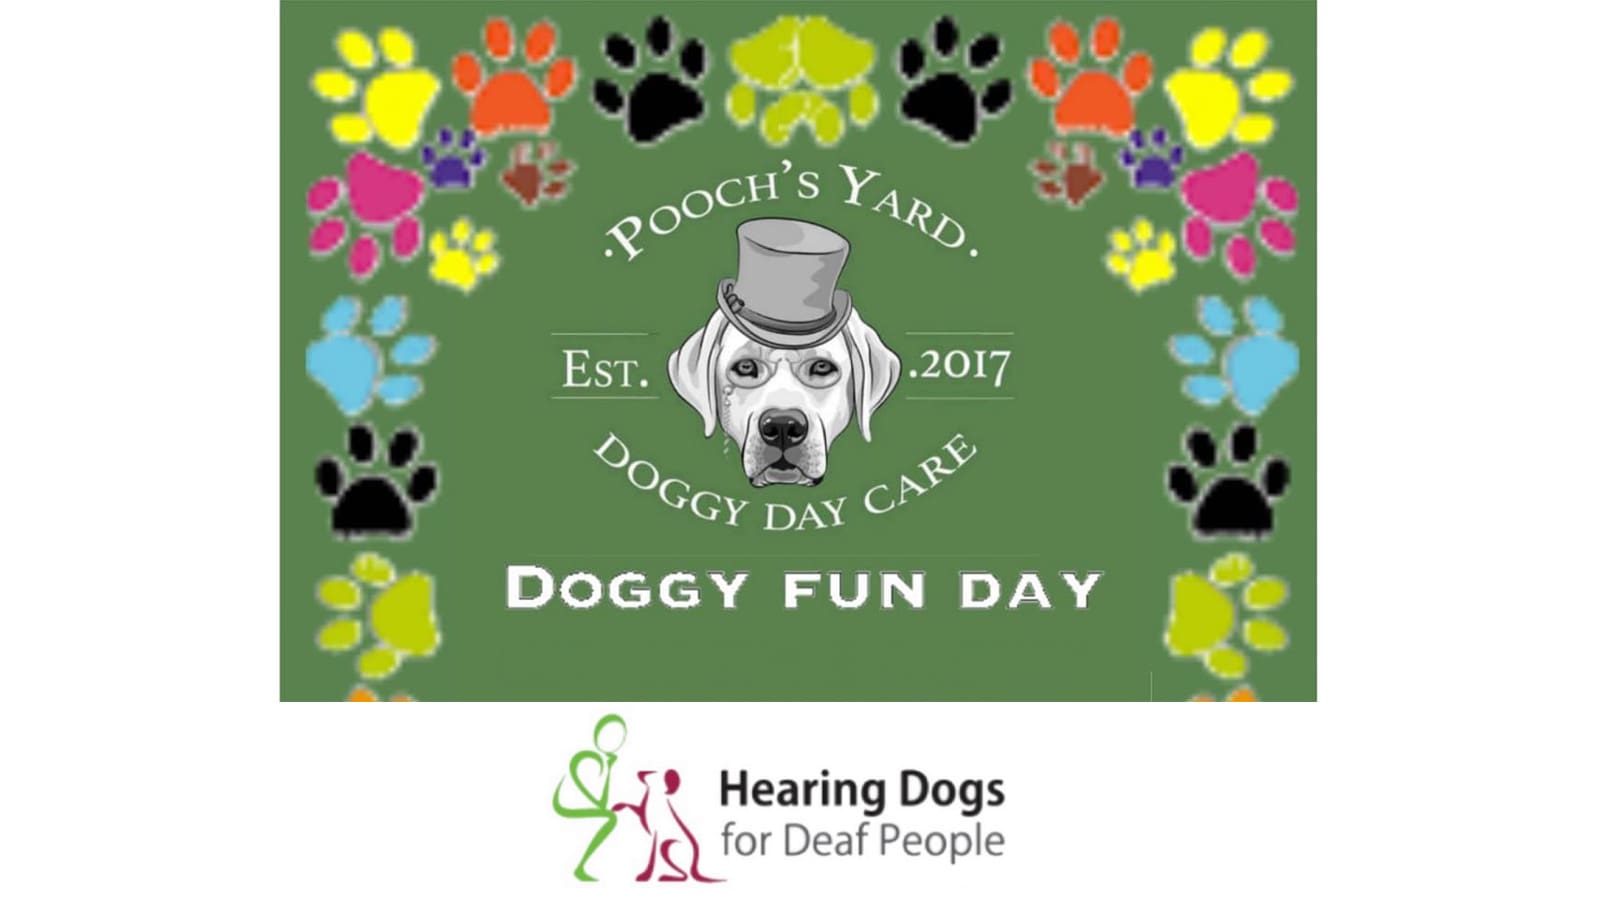 Thetford Bubbly Hub what's on and events Doggy Fun Day Pooch's Yard Hearing Dogs